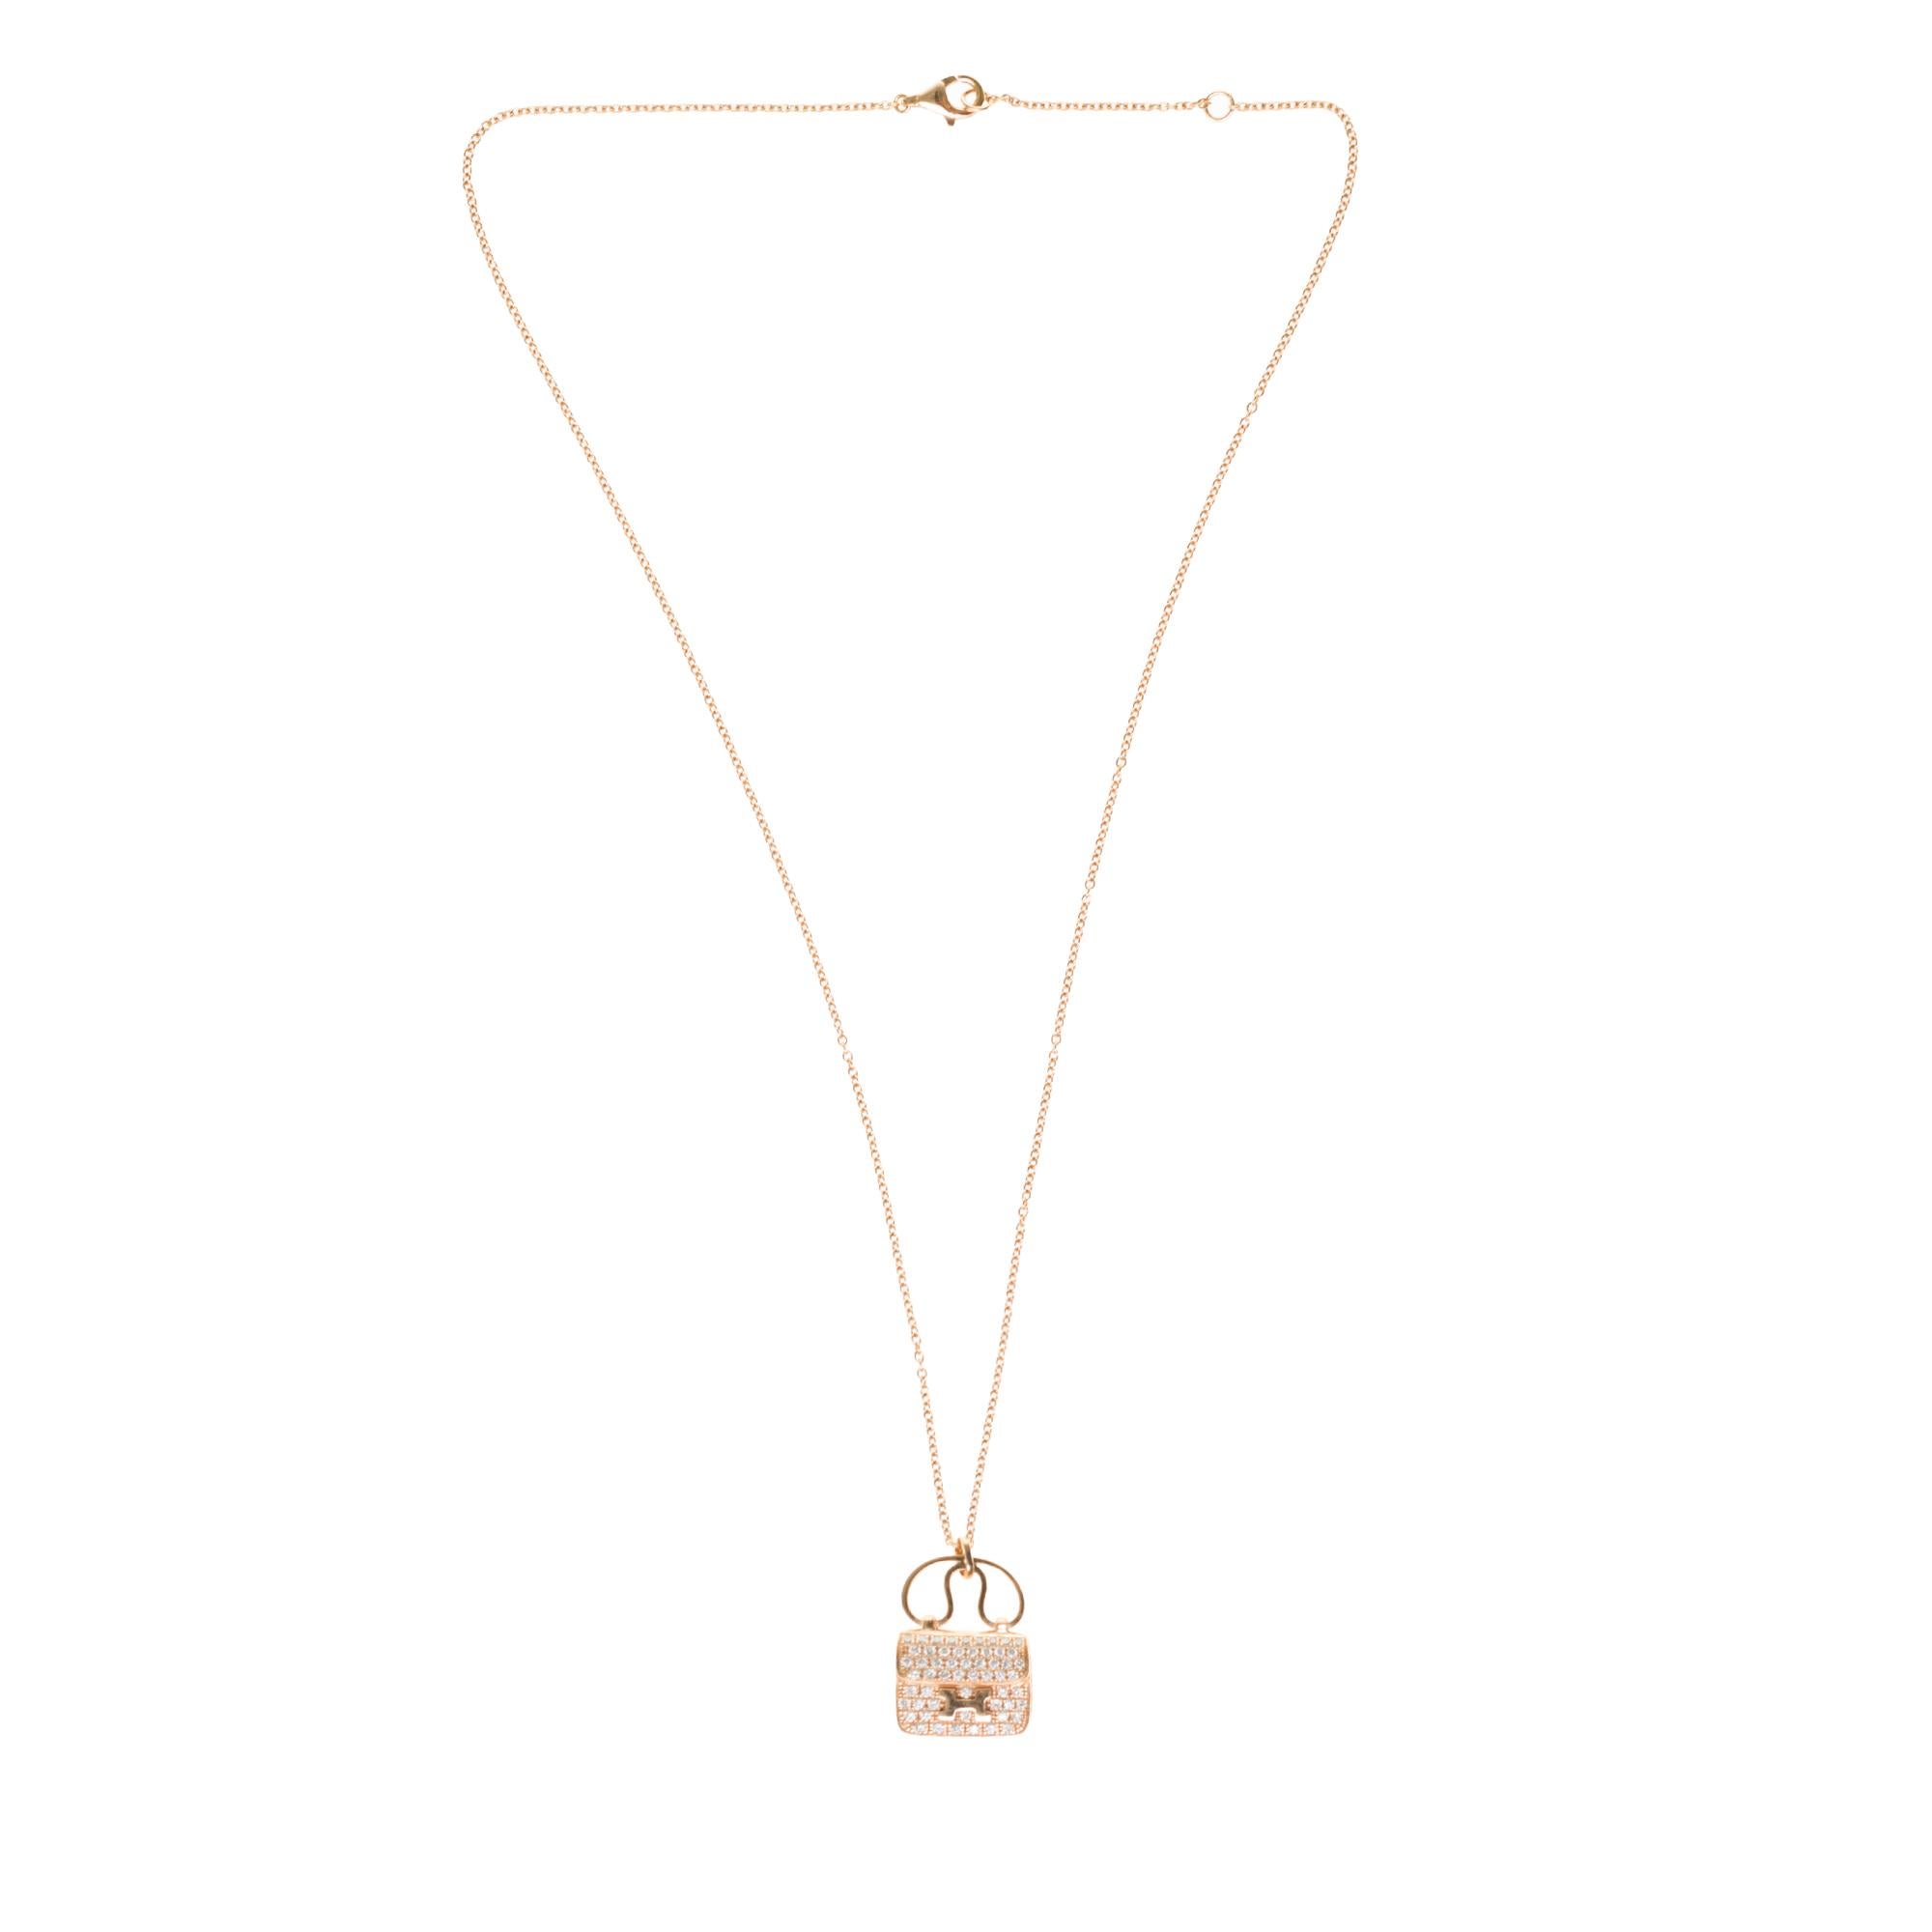 Splendid Hermès Amulette Constance pendant in rose gold set with 65 diamonds on adjustable chain in rose gold 750/1000

Signature: 